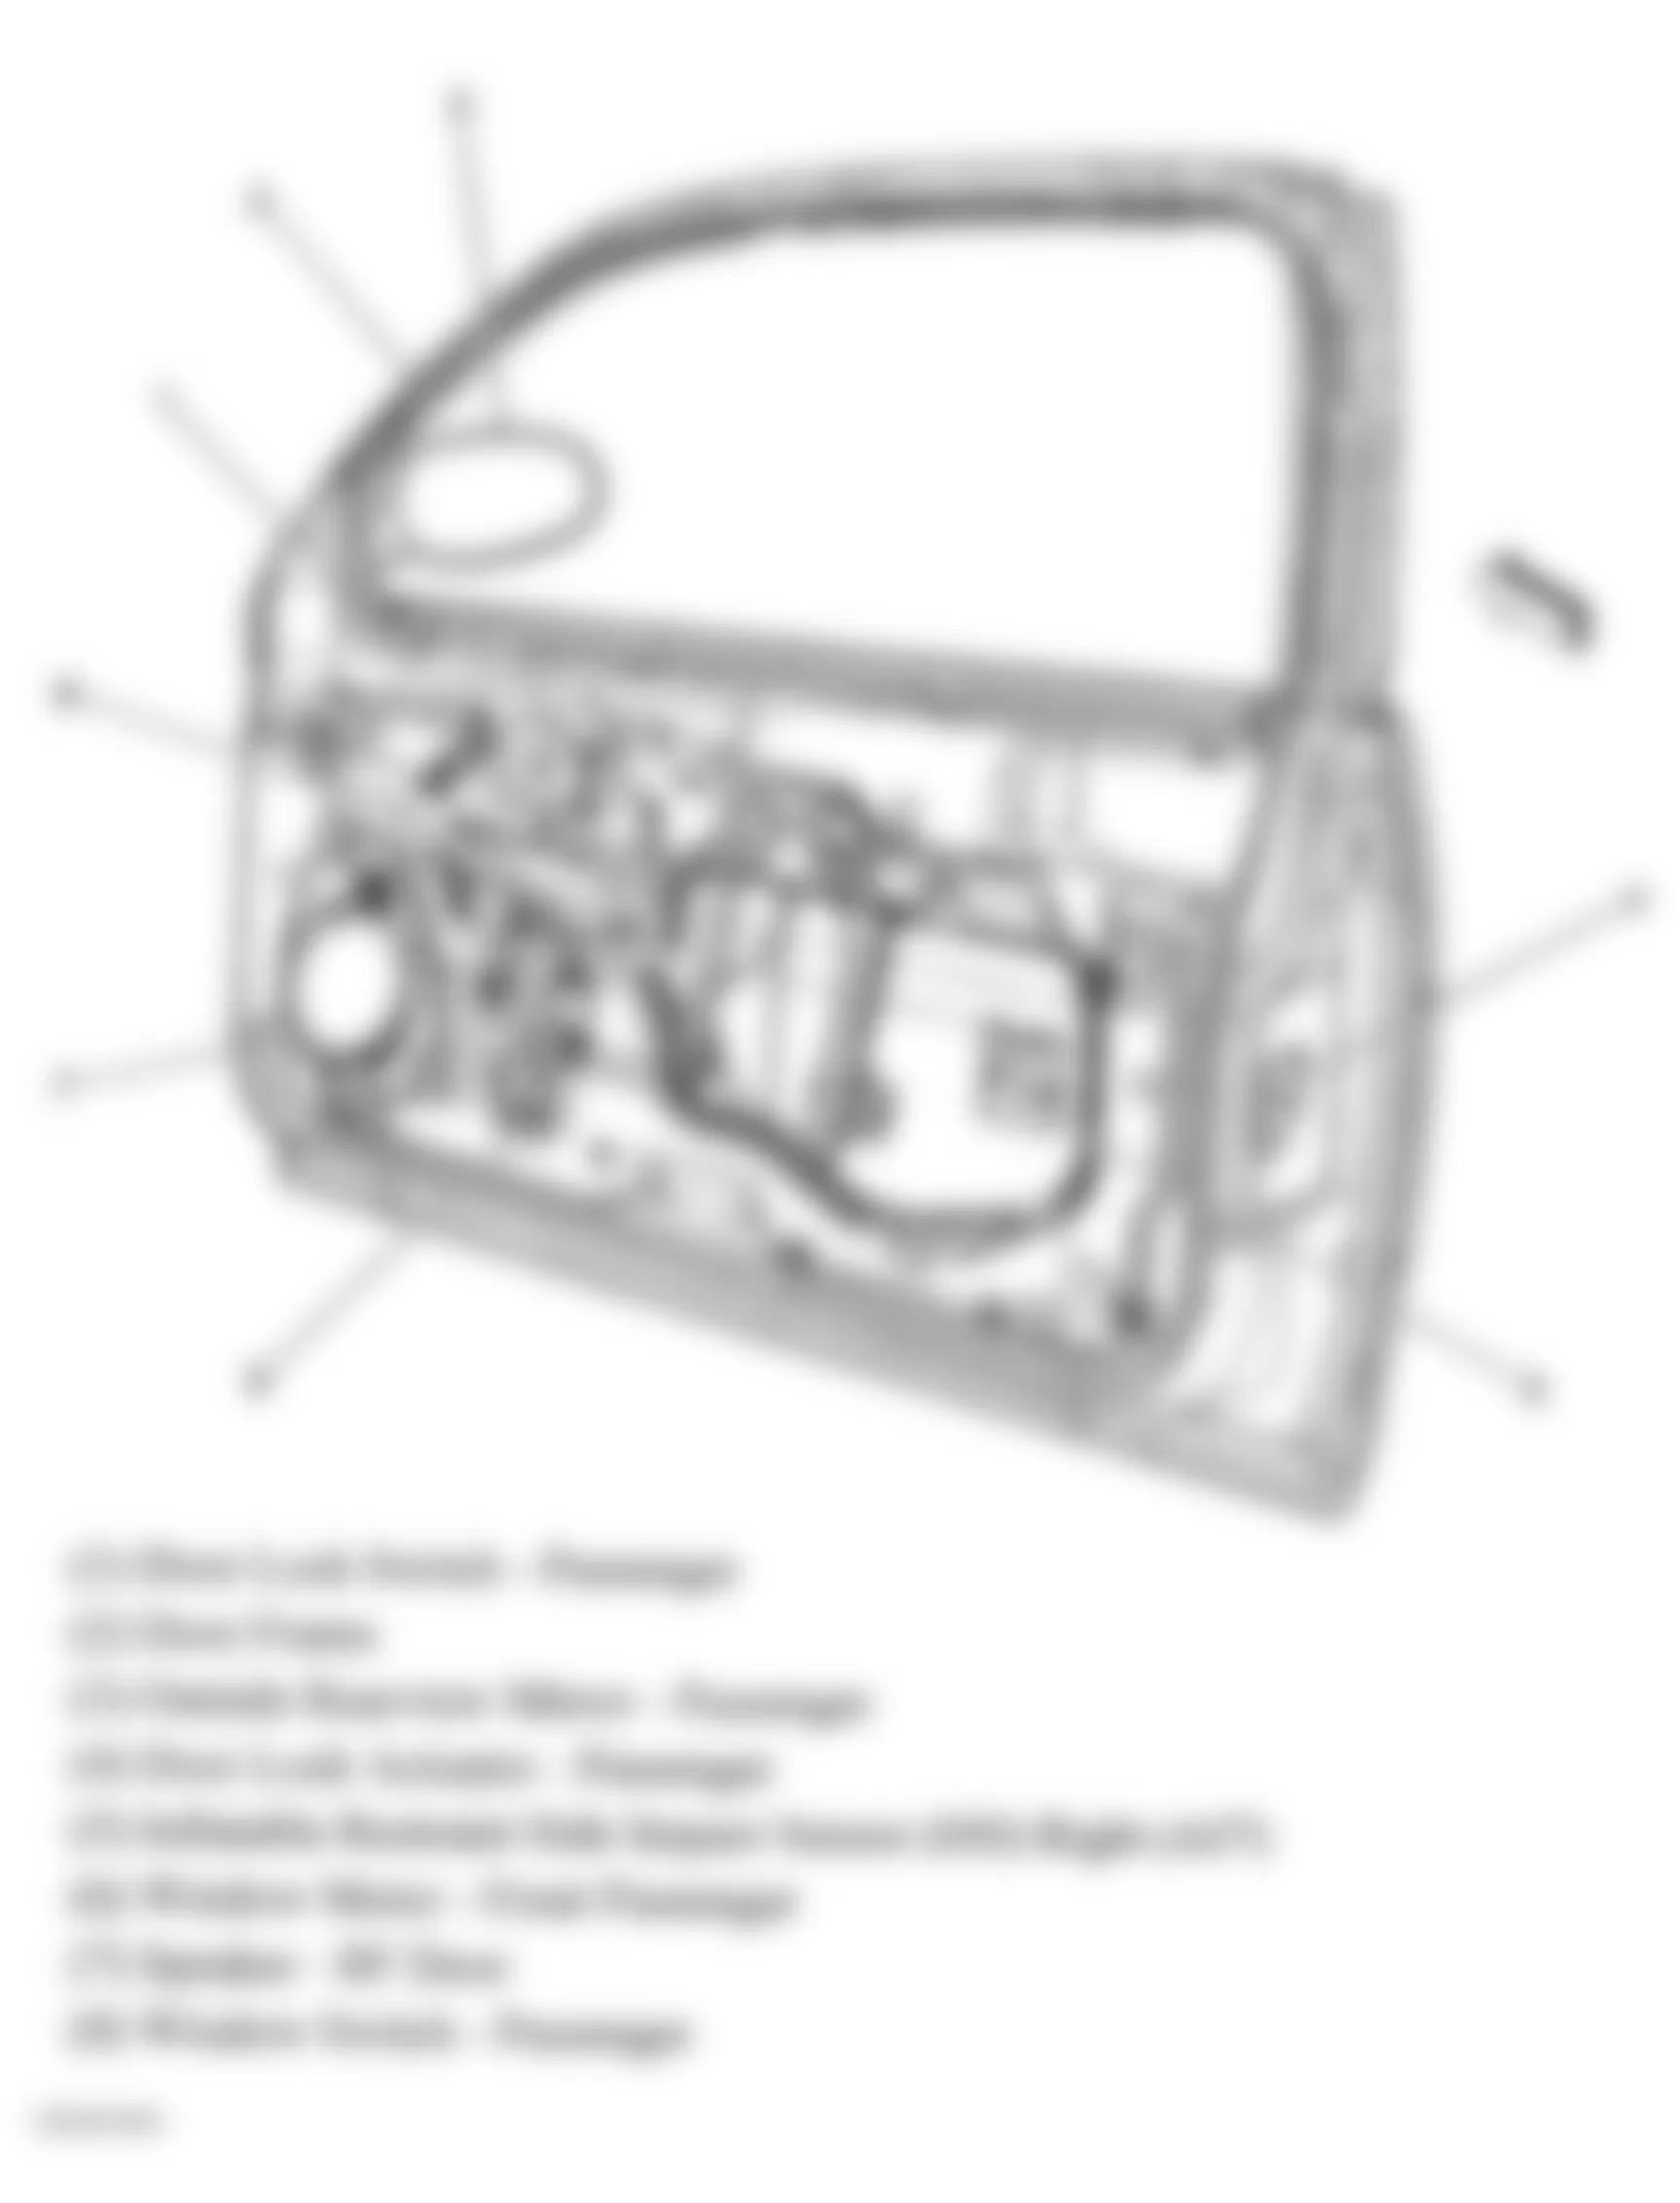 Chevrolet Monte Carlo LTZ 2006 - Component Locations -  Right Front Door Components (Coupe)